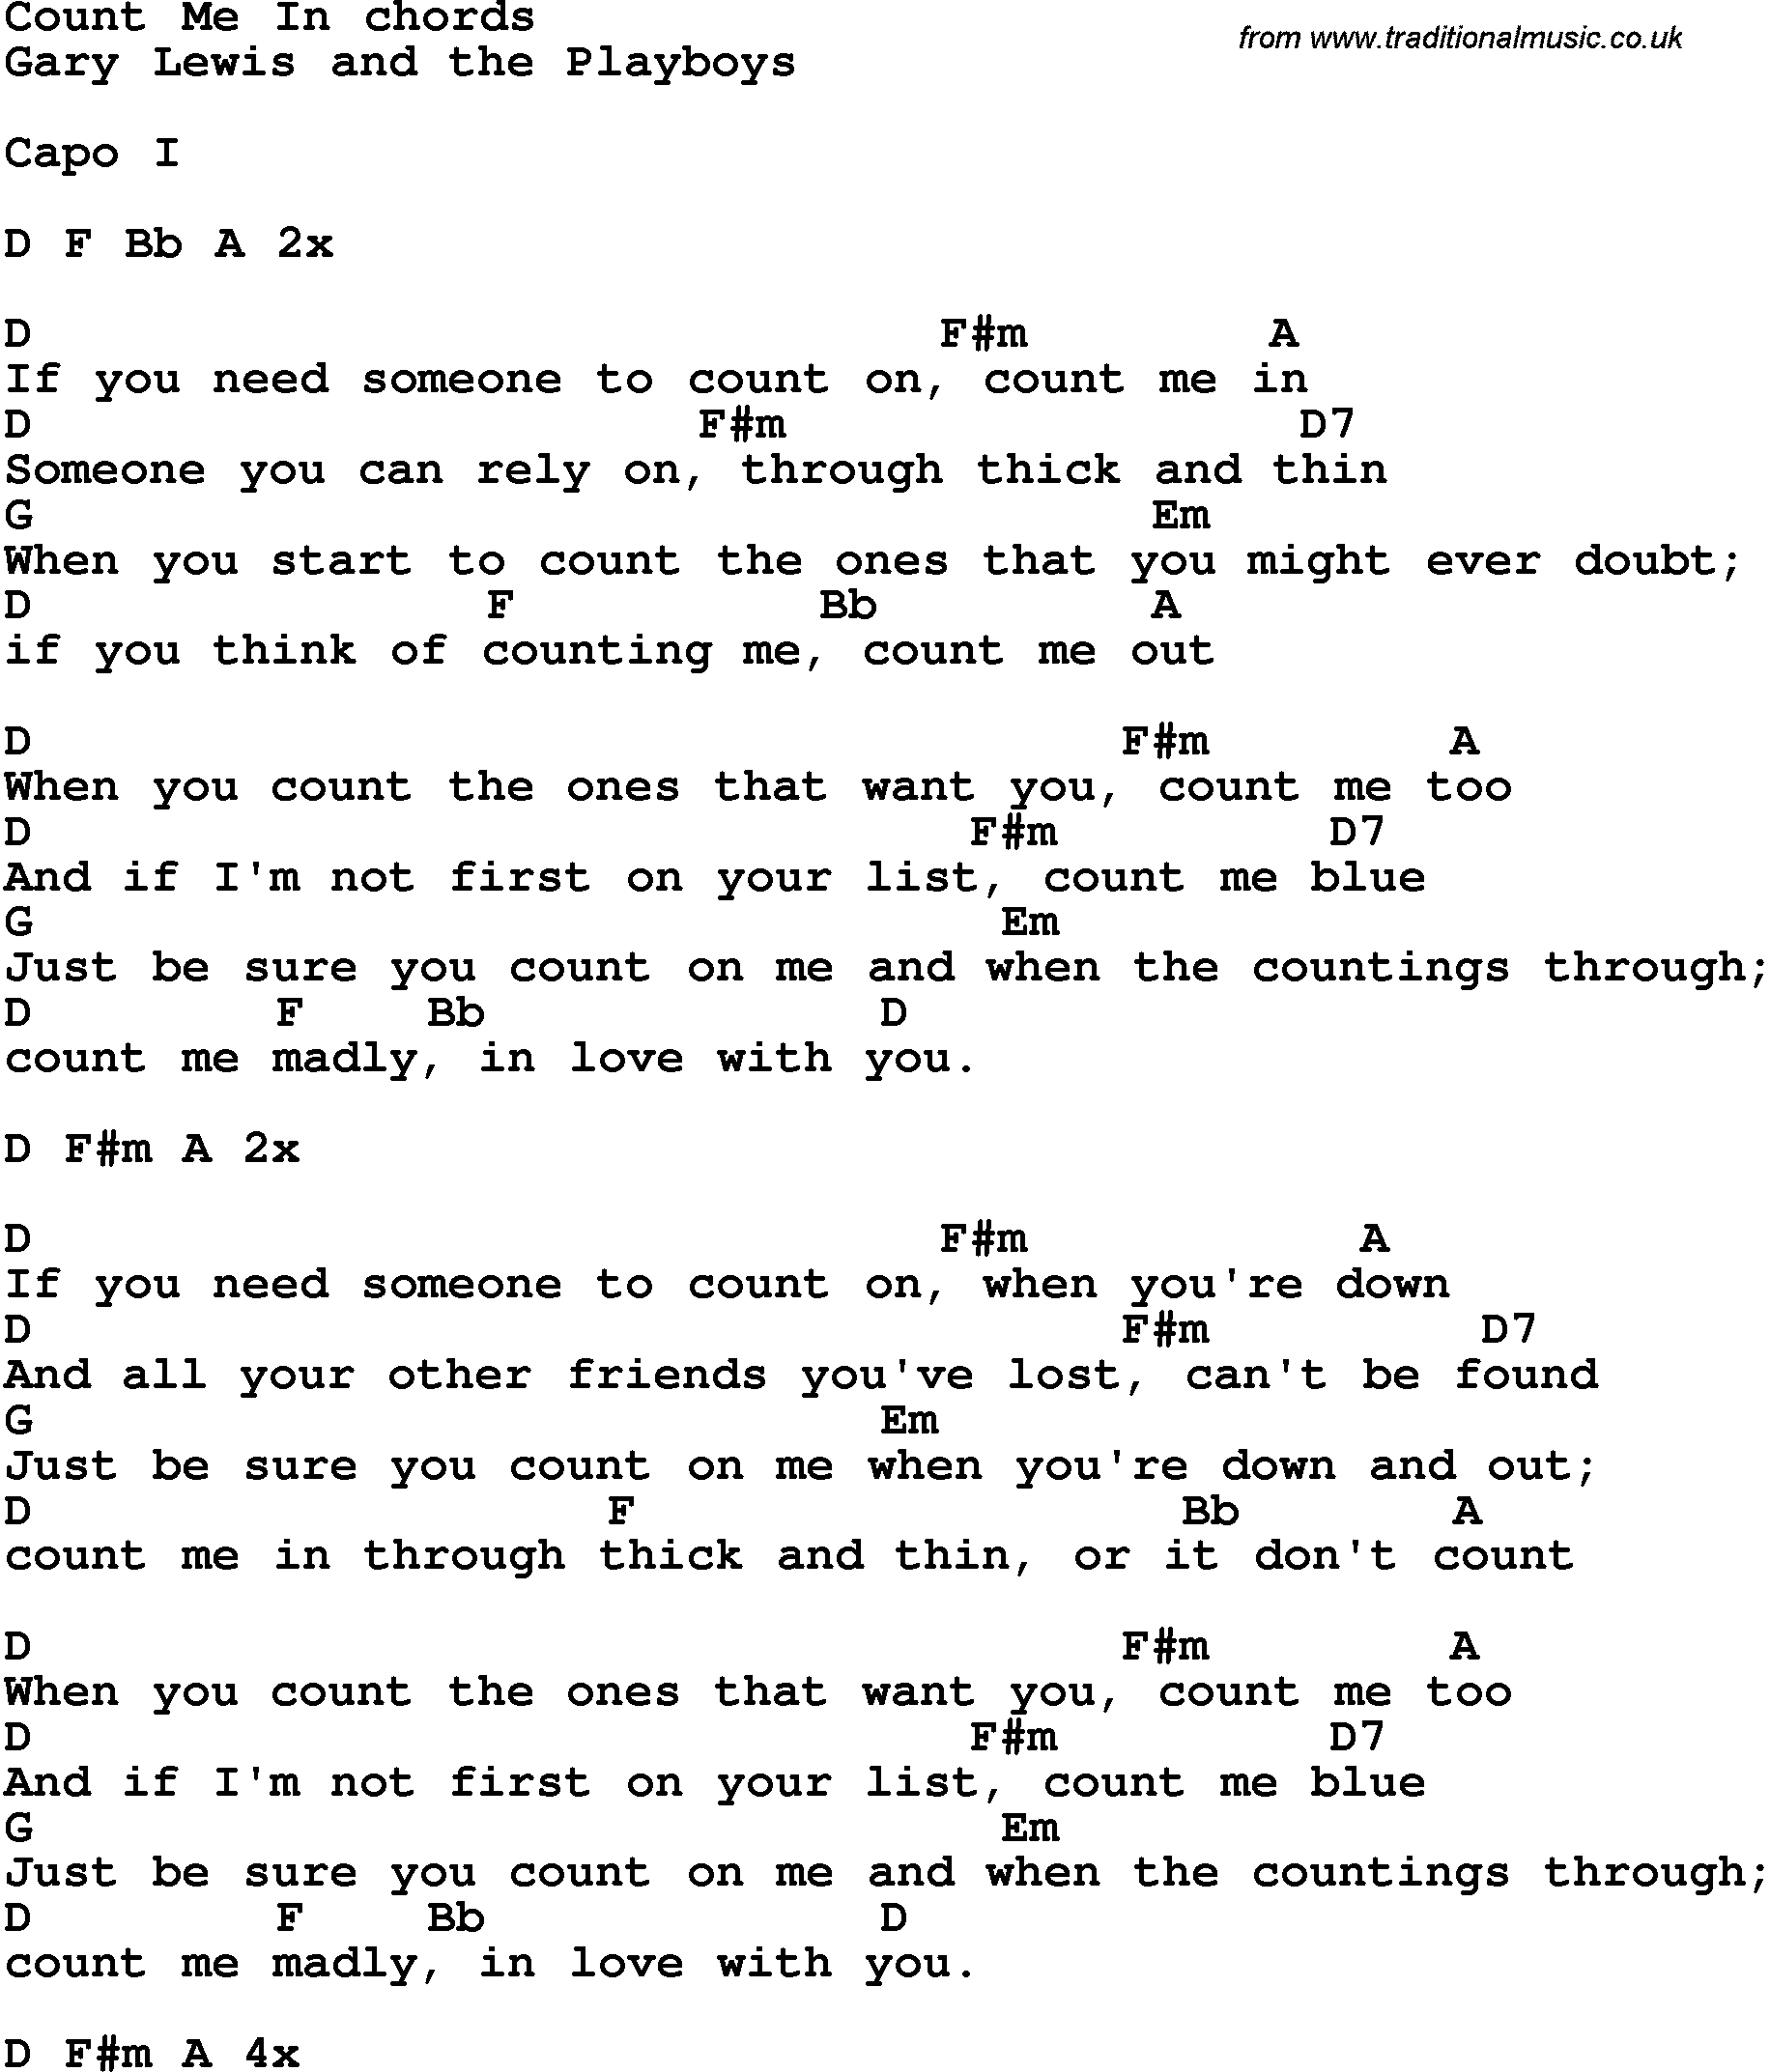 Count On Me Chords Song Lyrics With Guitar Chords For Count Me In